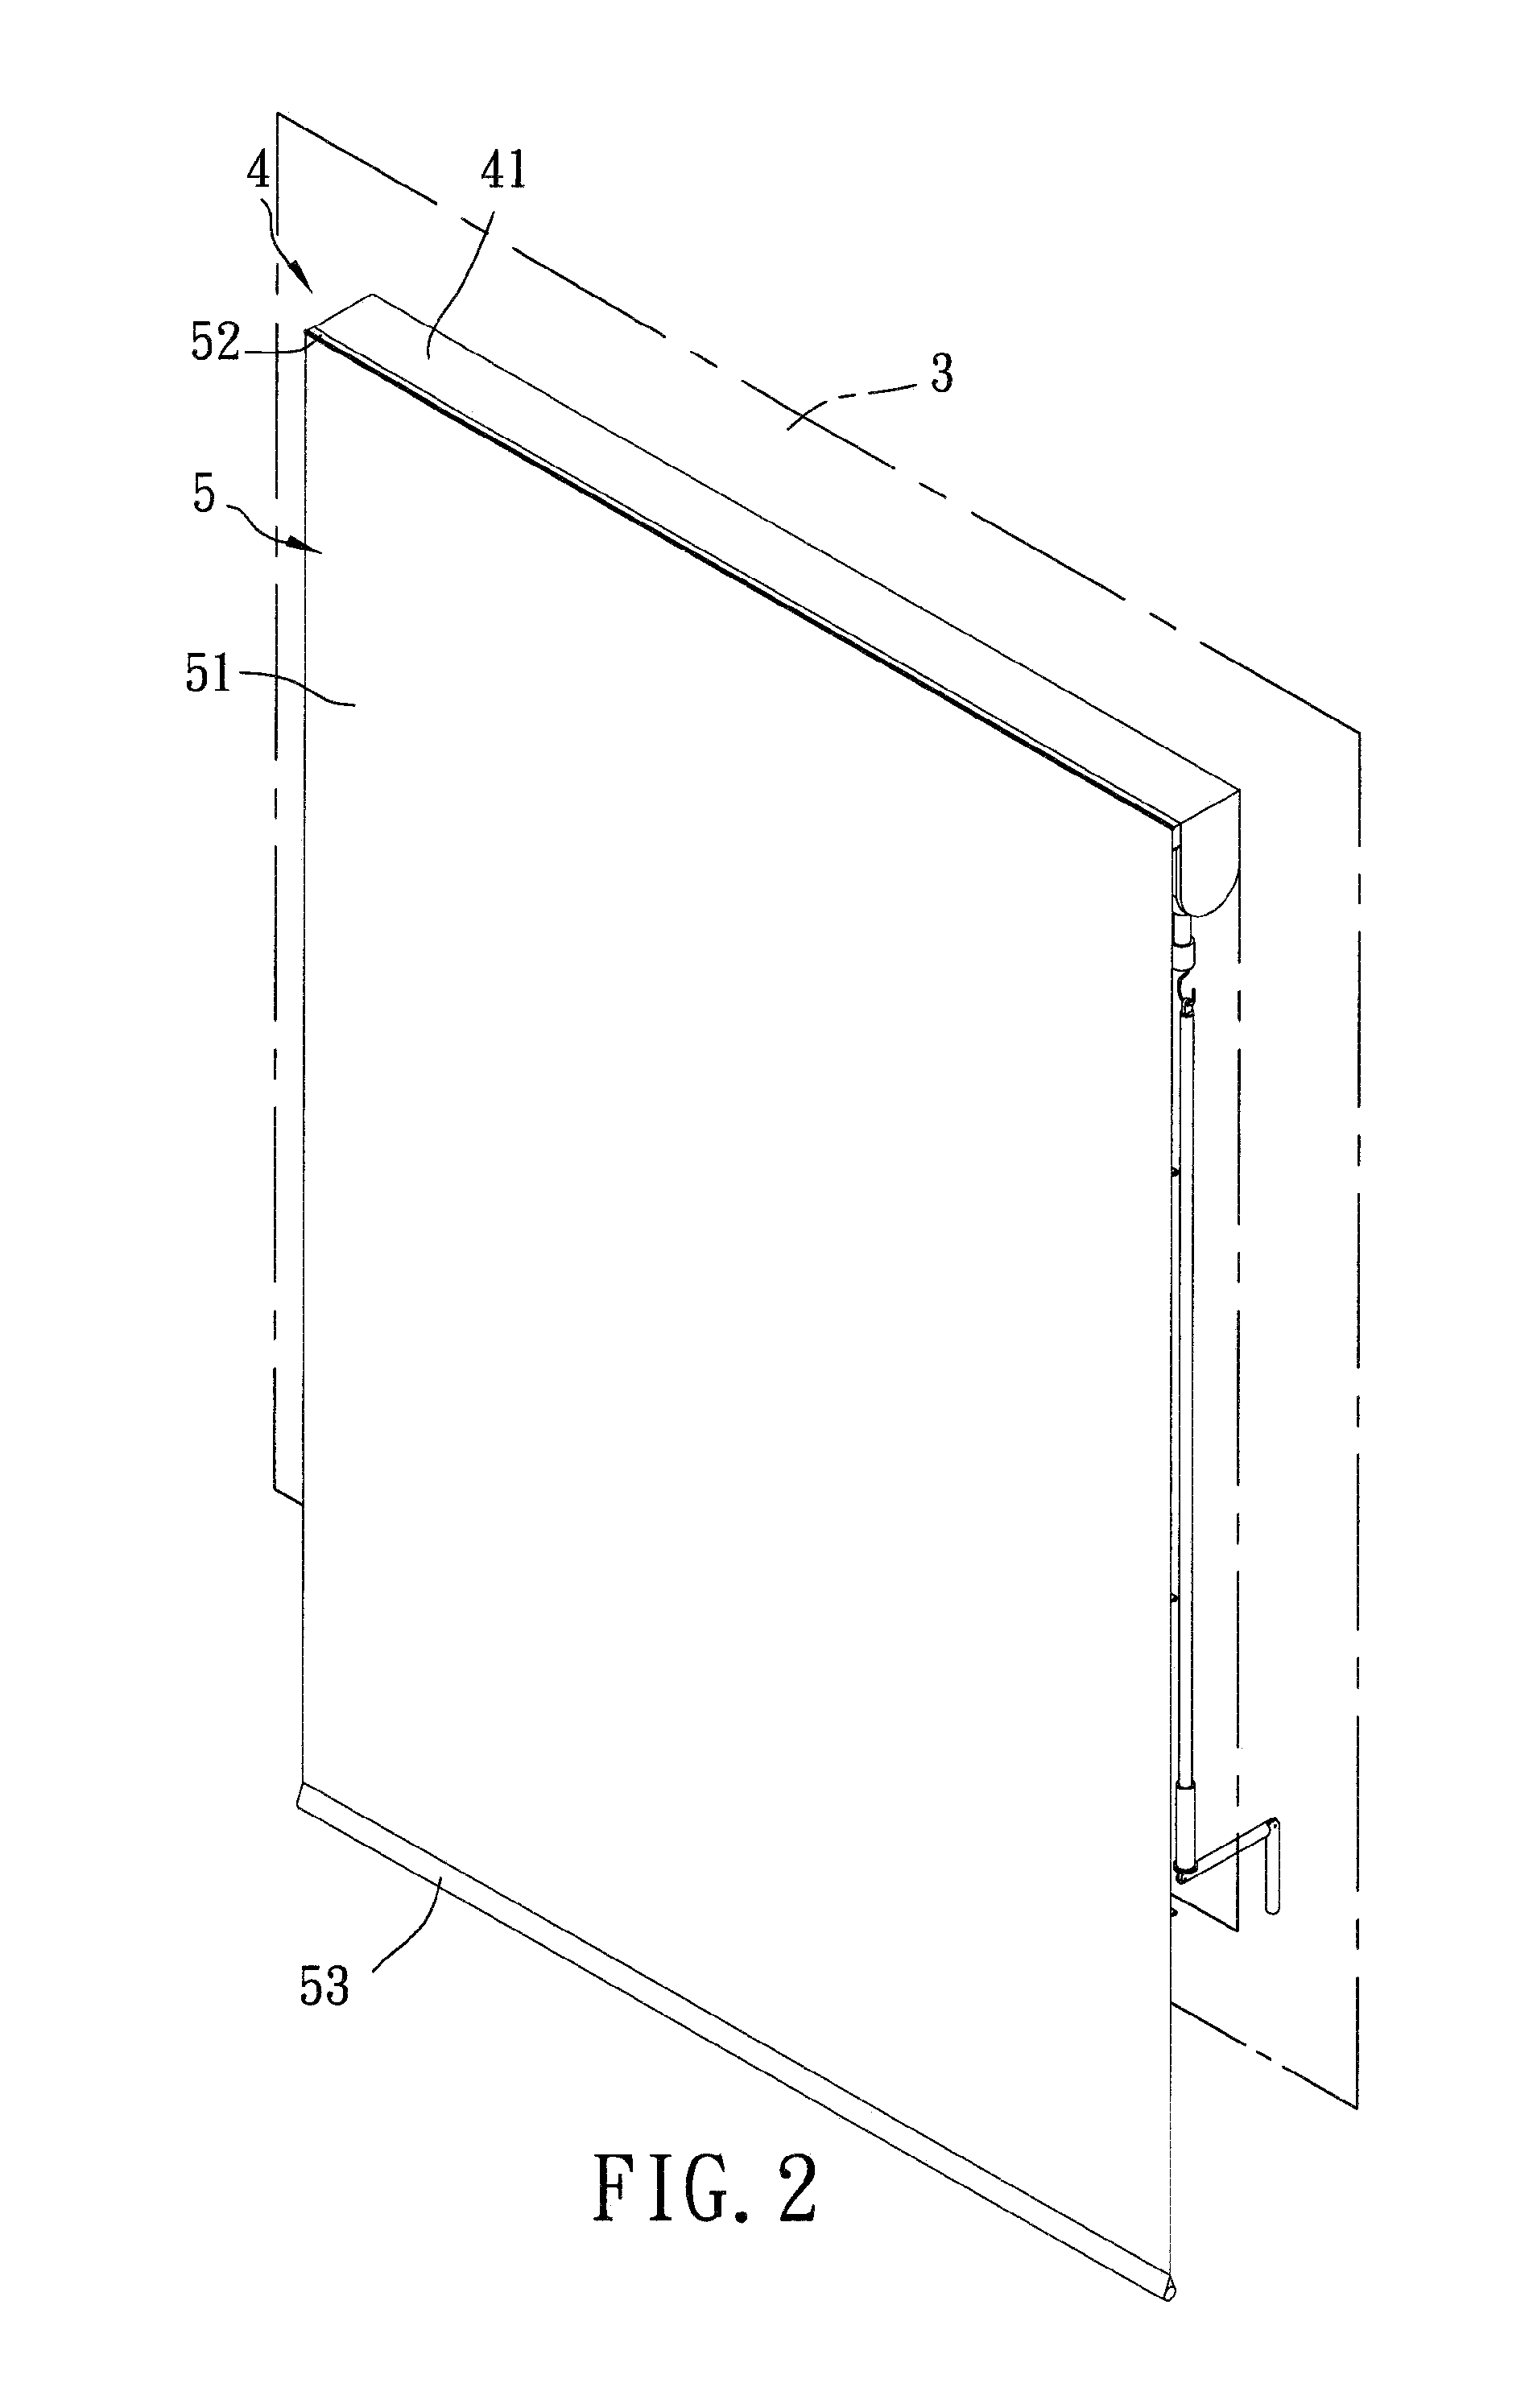 Window blind assembly